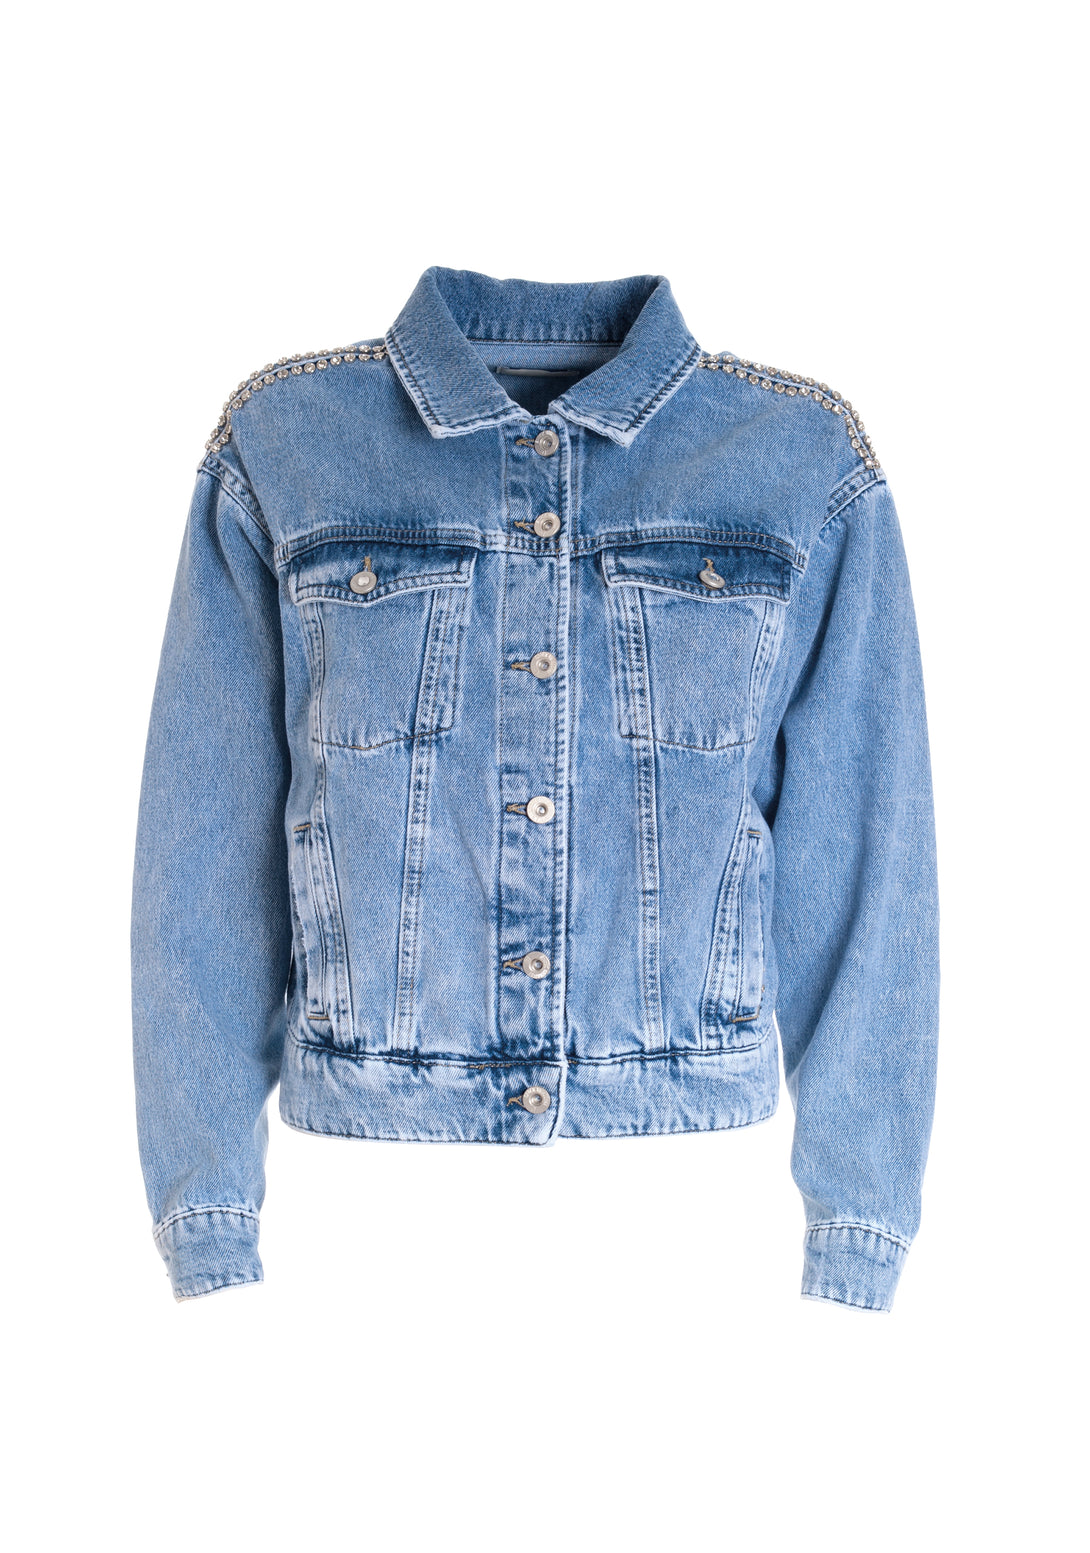 Jacket wide fit made in denim with bleached wash